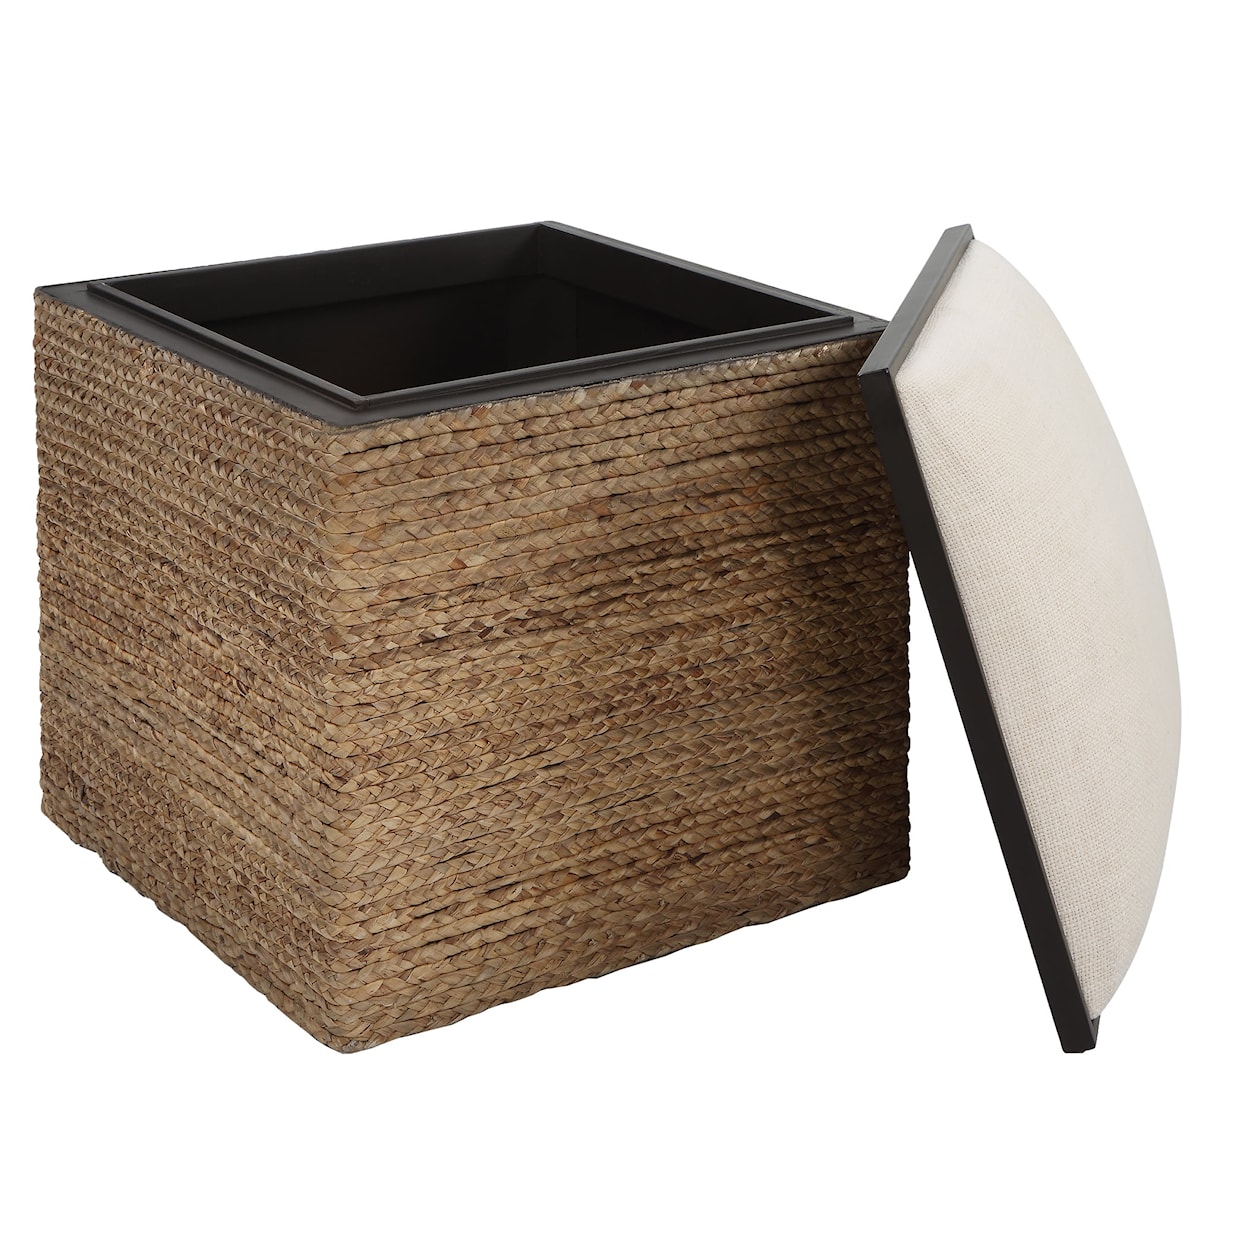 Uttermost Island Island Square Straw Accent Stool